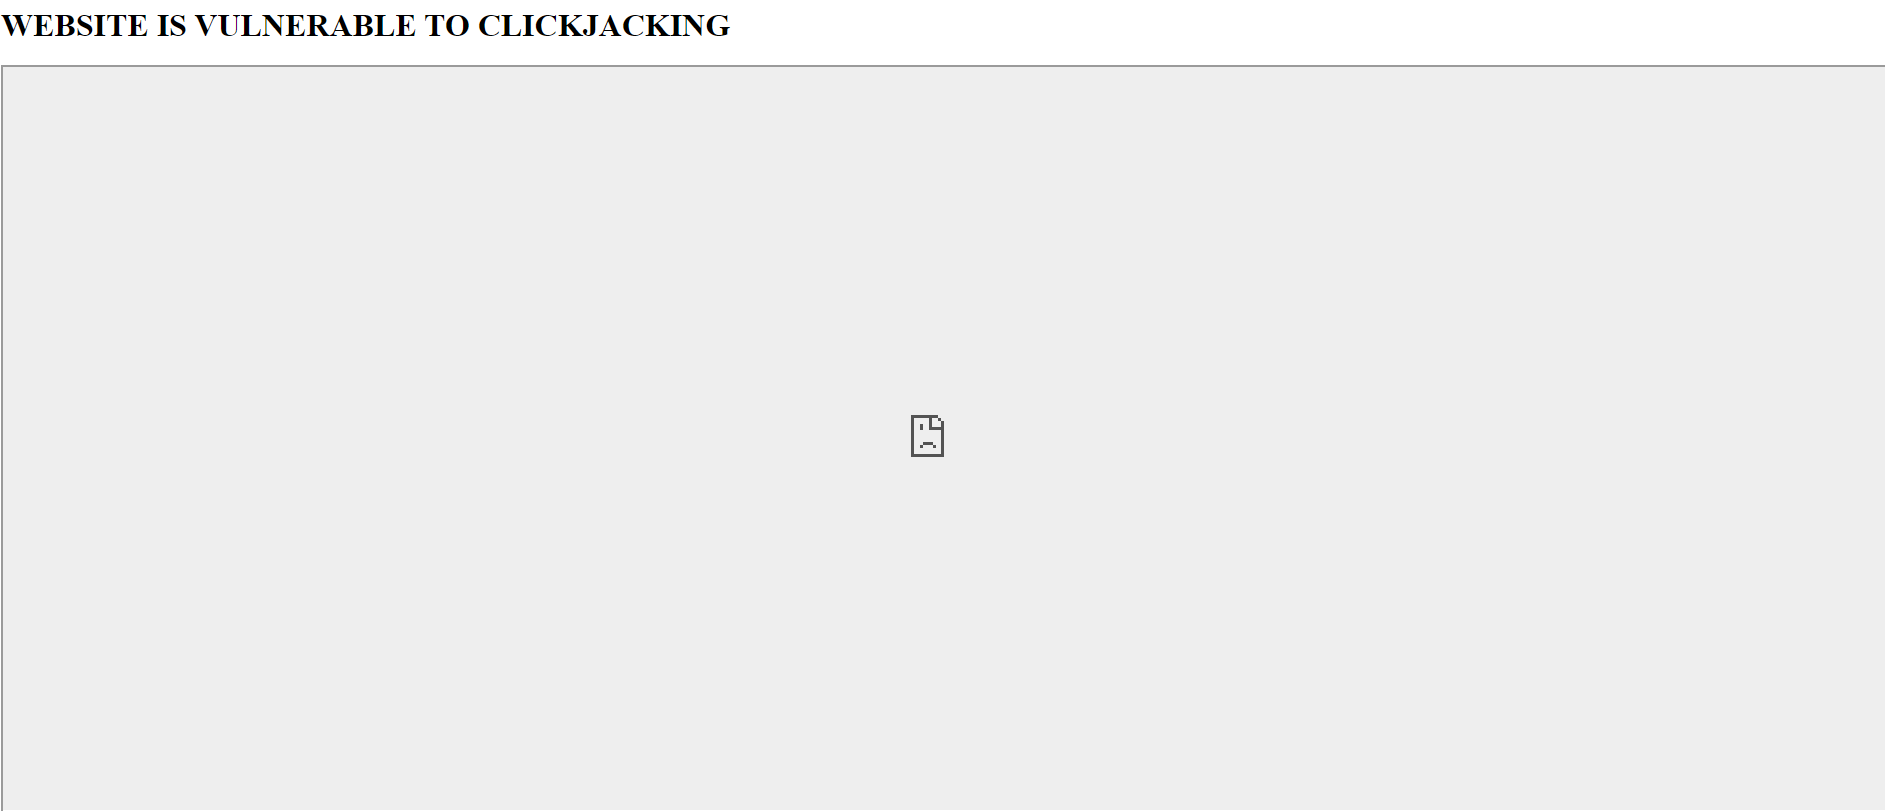 Webpage showing a message indicating a website is vulnerable to clickjacking with an empty iframe